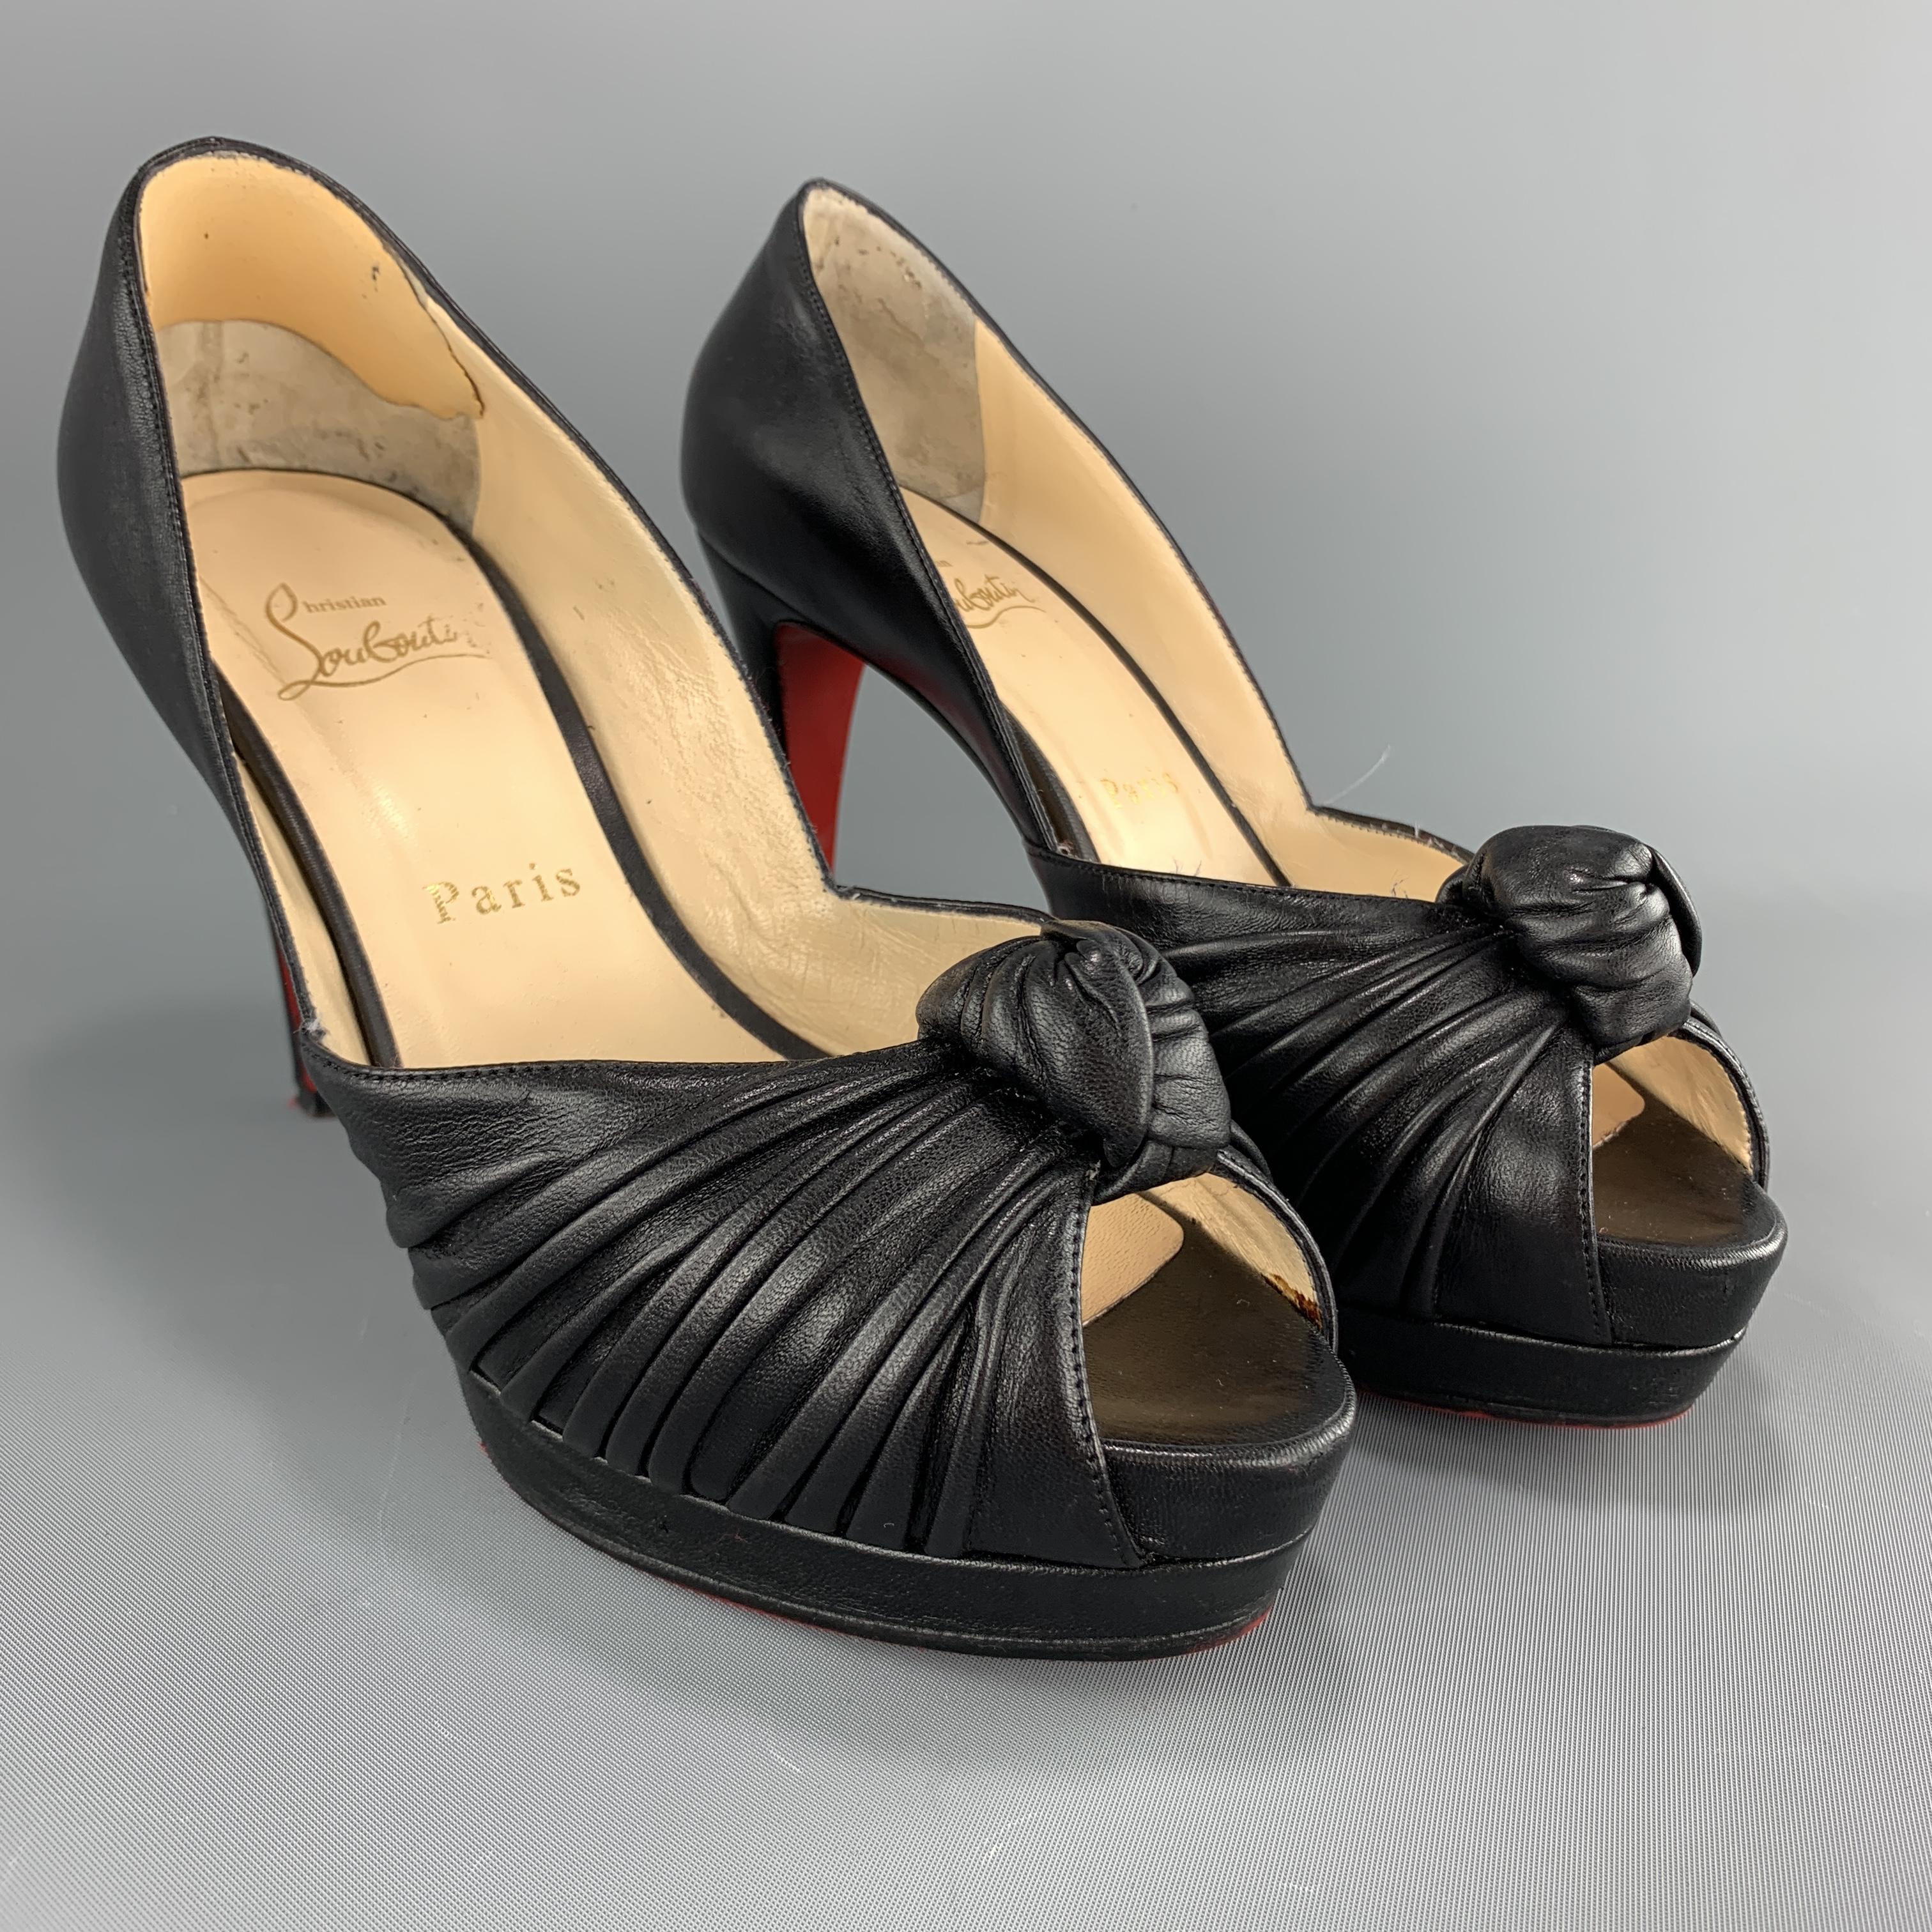 CHRISTIAN LOUBOUTIN pumps come in black leather with a knotted peep toe strap and platform. Made in Italy.

Very Good Pre-Owned Condition.
Marked: IT 37

Measurements:

Heel: 3.75 in.
Platform: 1.25 in.